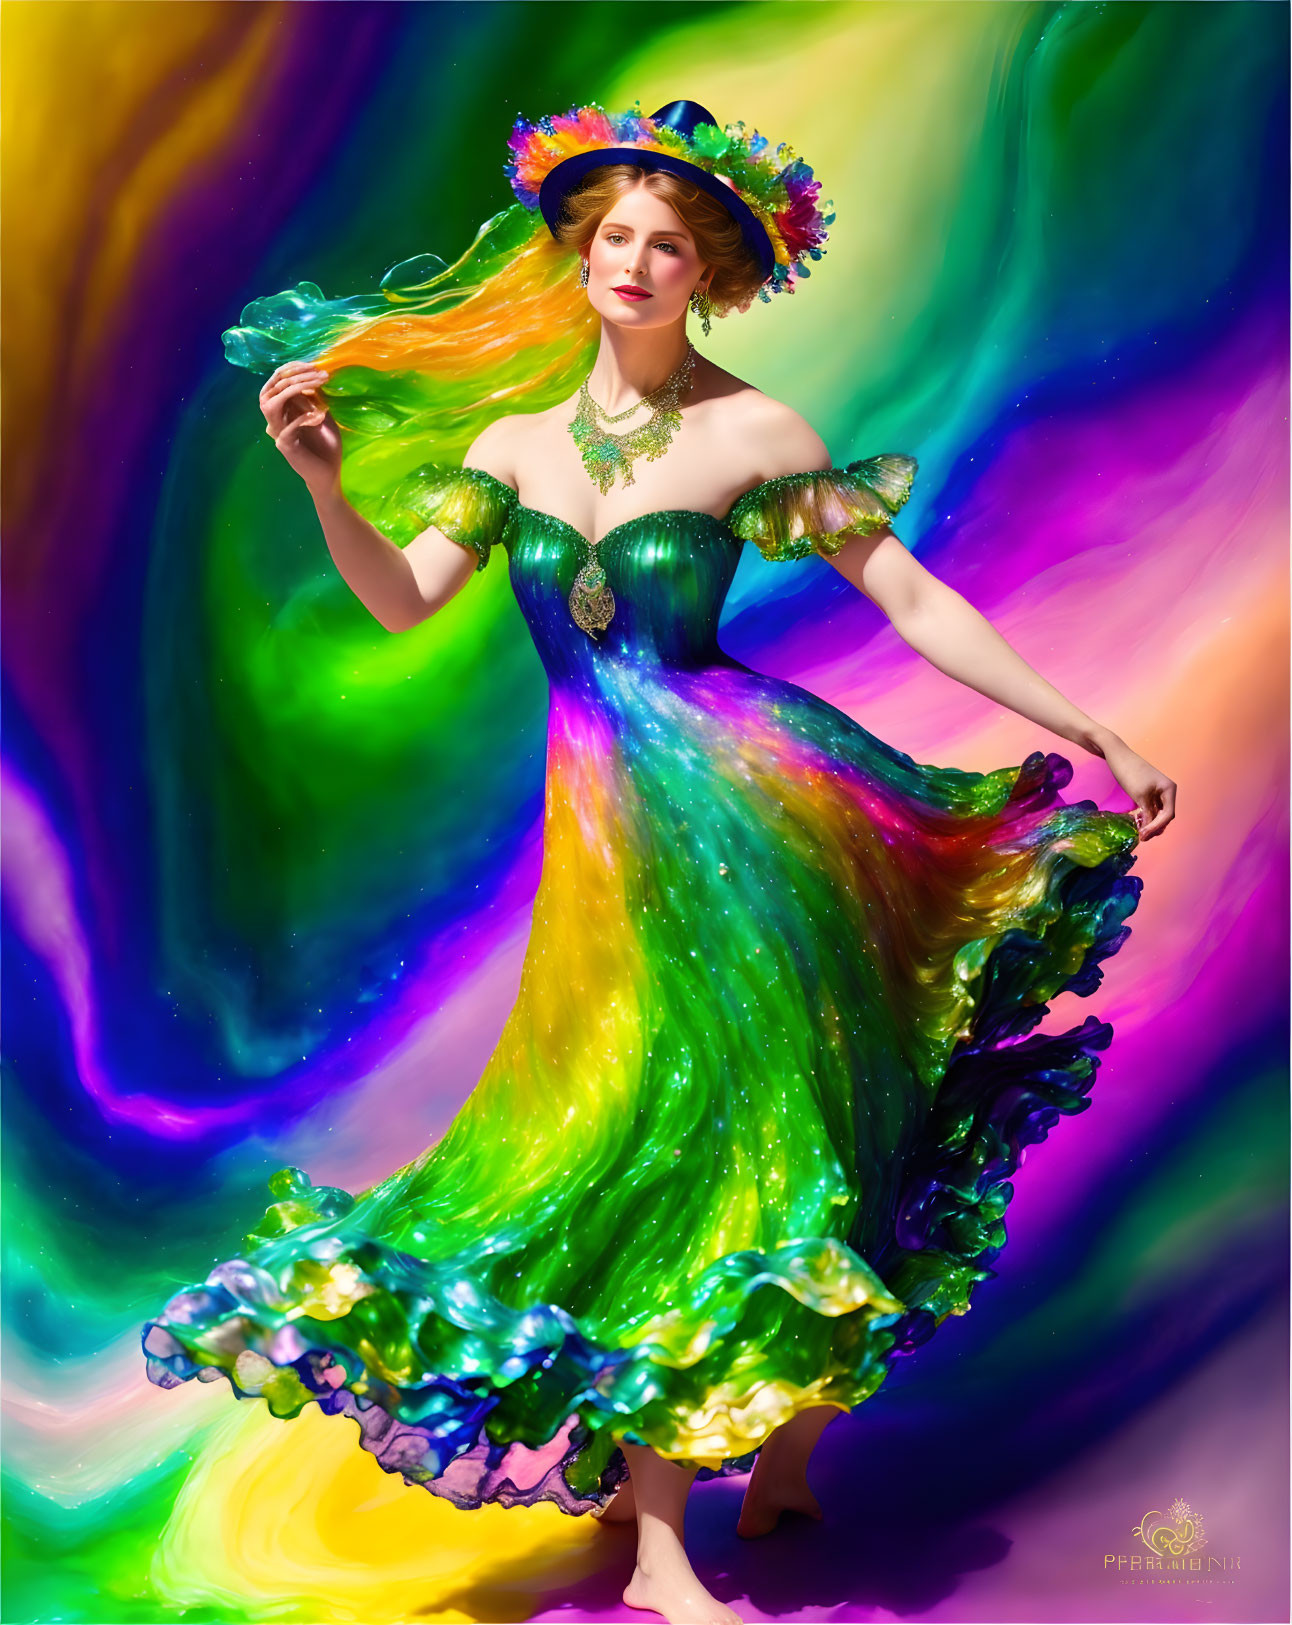 Woman in colorful dress